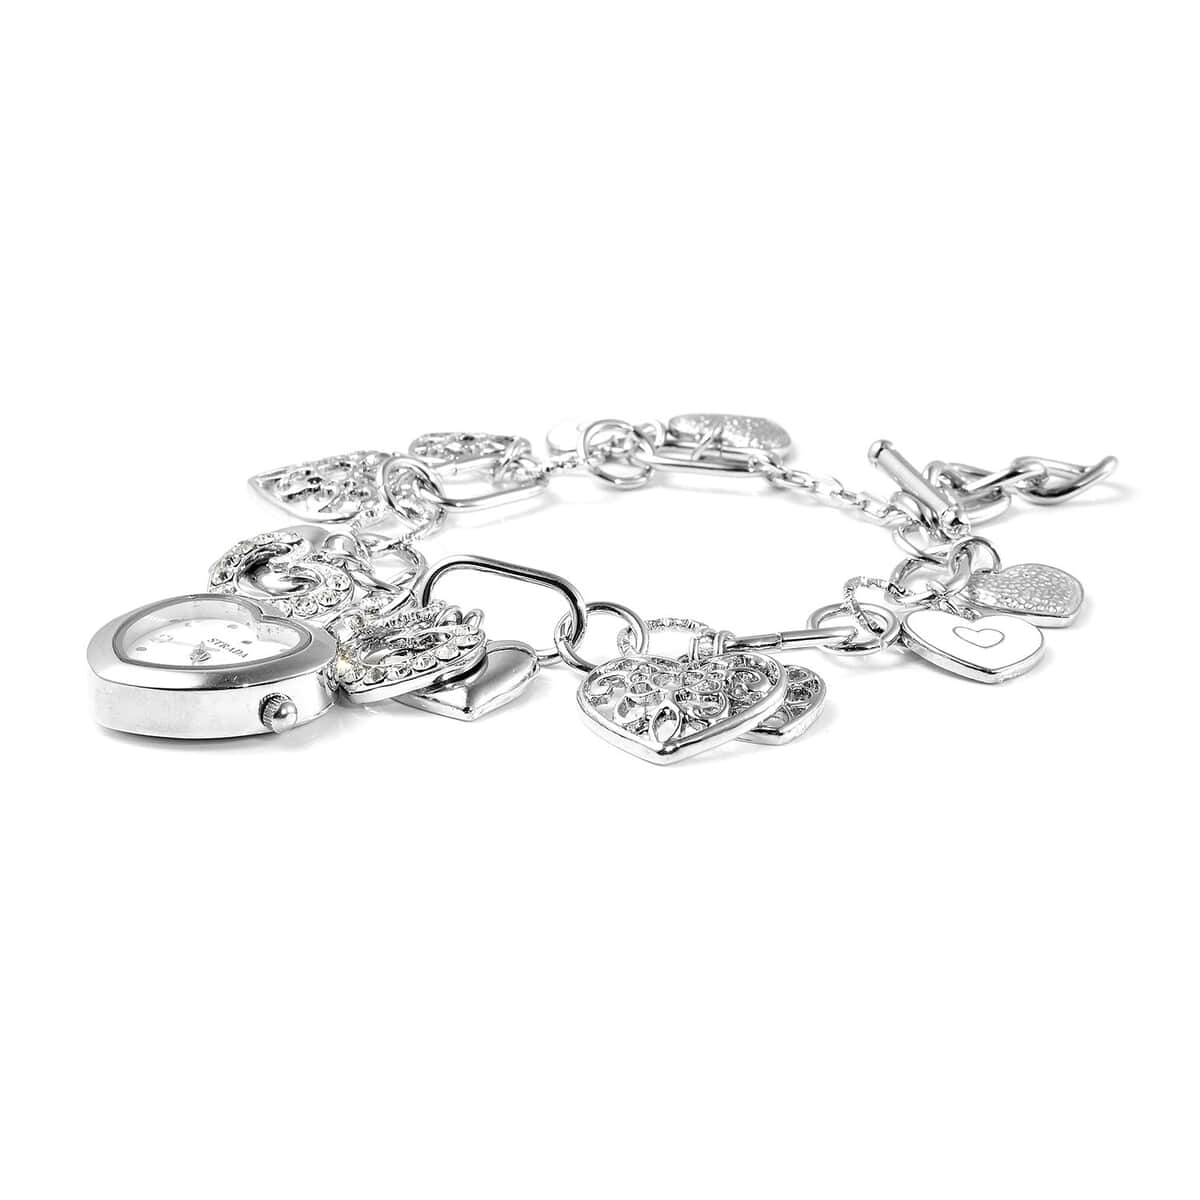 Strada White Austrian Crystal and Enameled Japanese Movement Charm Heart Bracelet Watch in Silvertone (7.5-9 in) image number 2